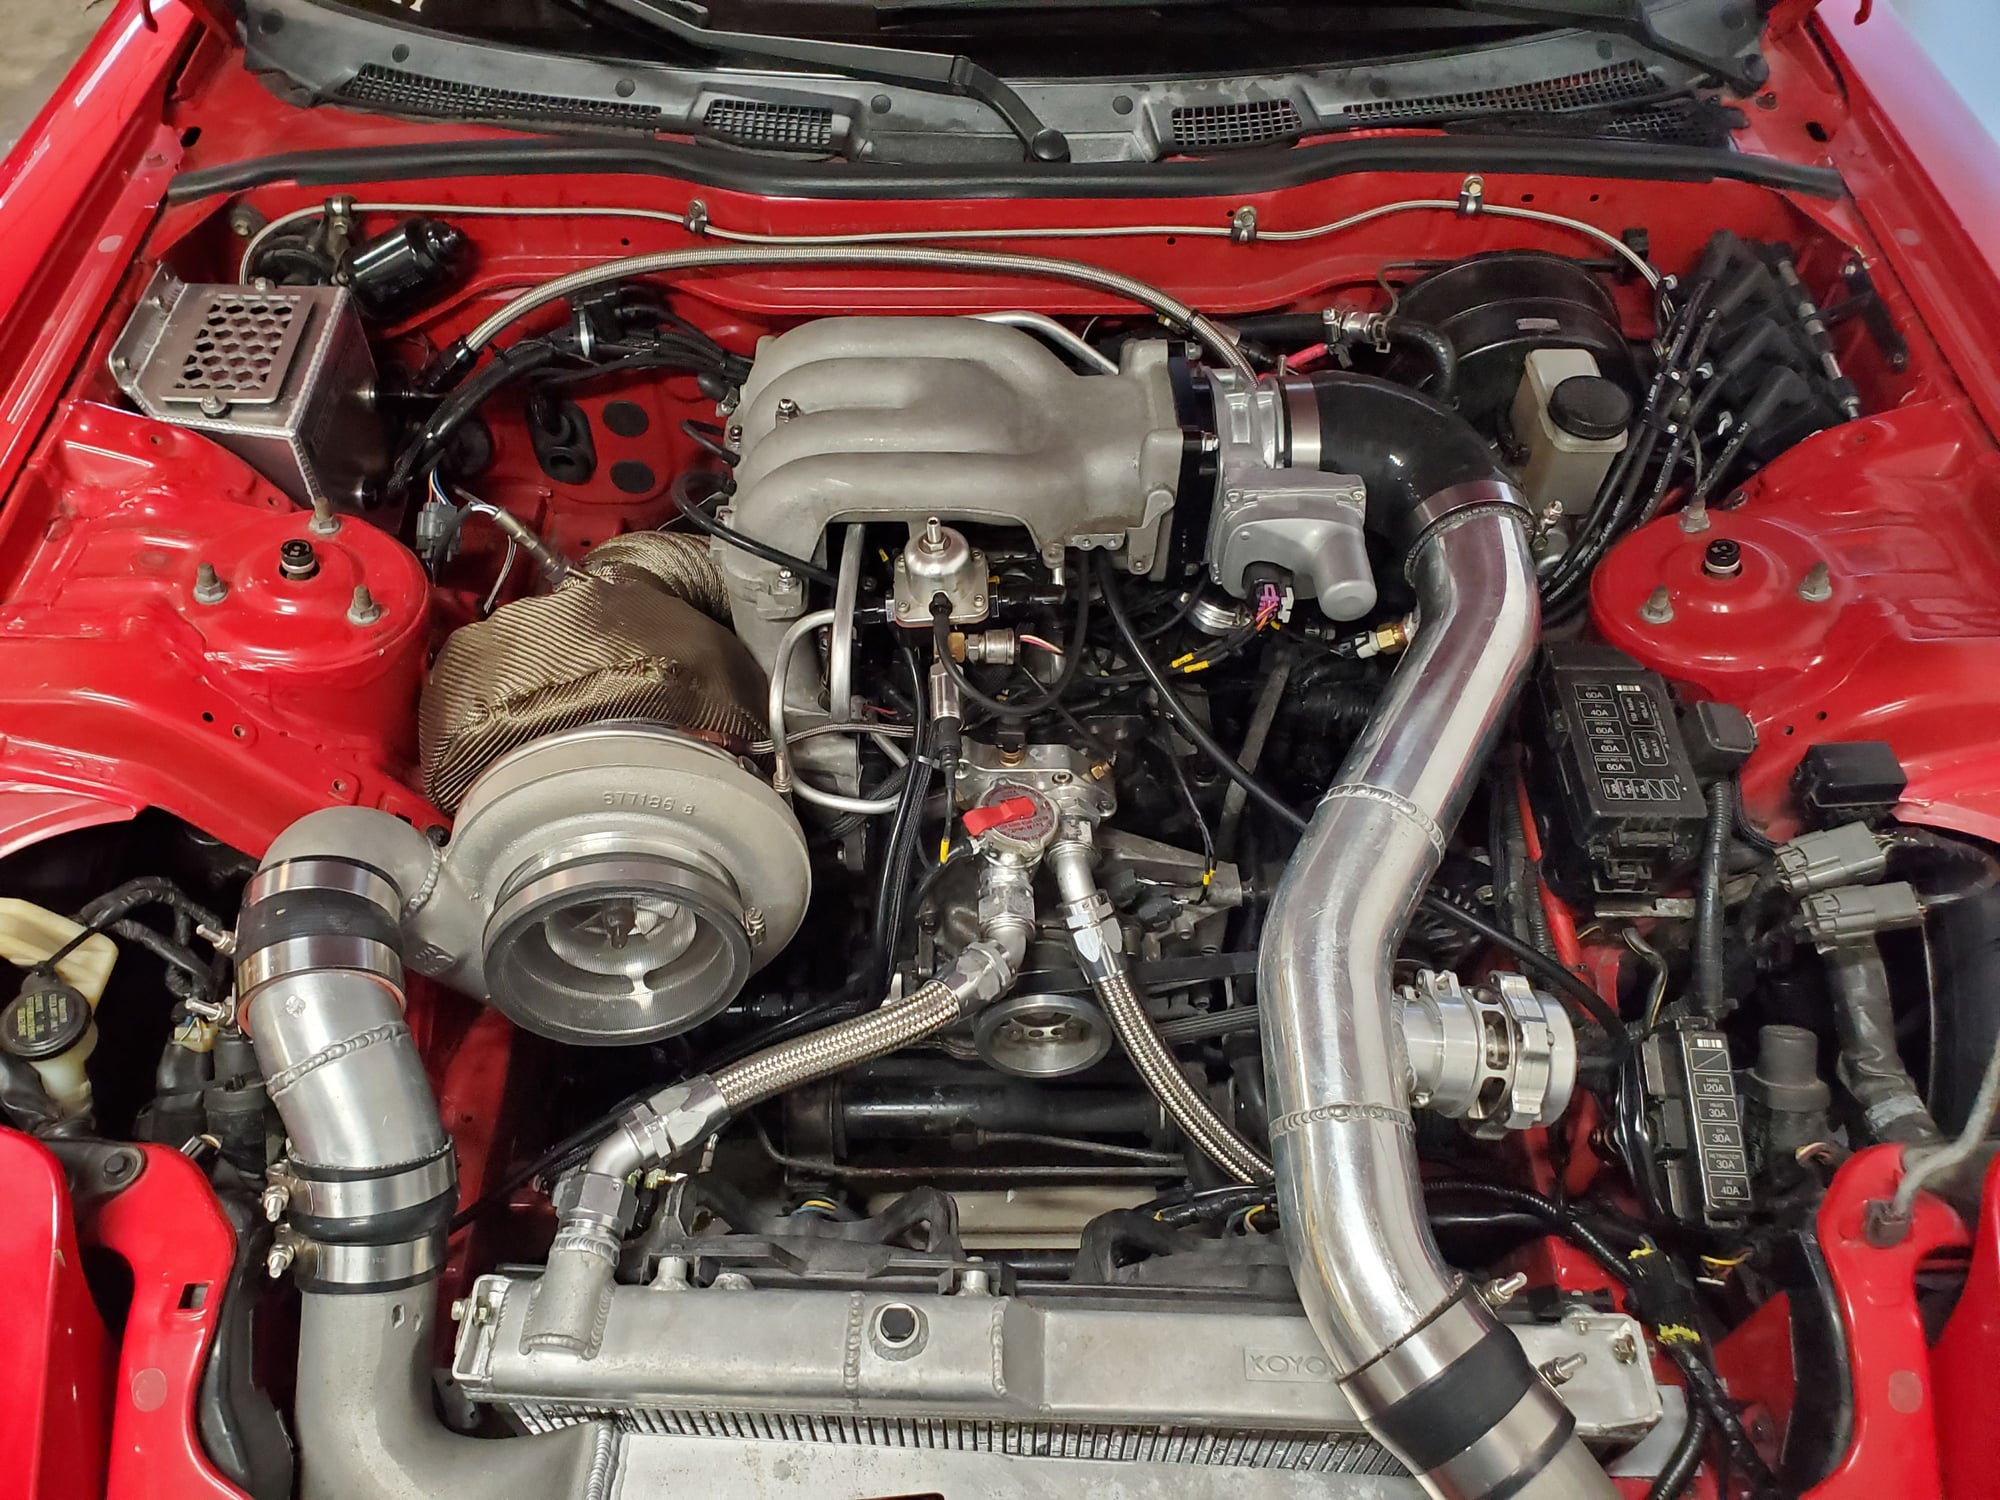 1993 Mazda RX-7 - Semi Peripheral Port FD 778RWHP Street MONSTER for Sale - Used - VIN JM1FD3310P0201279 - 53,000 Miles - Other - 2WD - Manual - Coupe - Red - Canton, GA 30114, United States